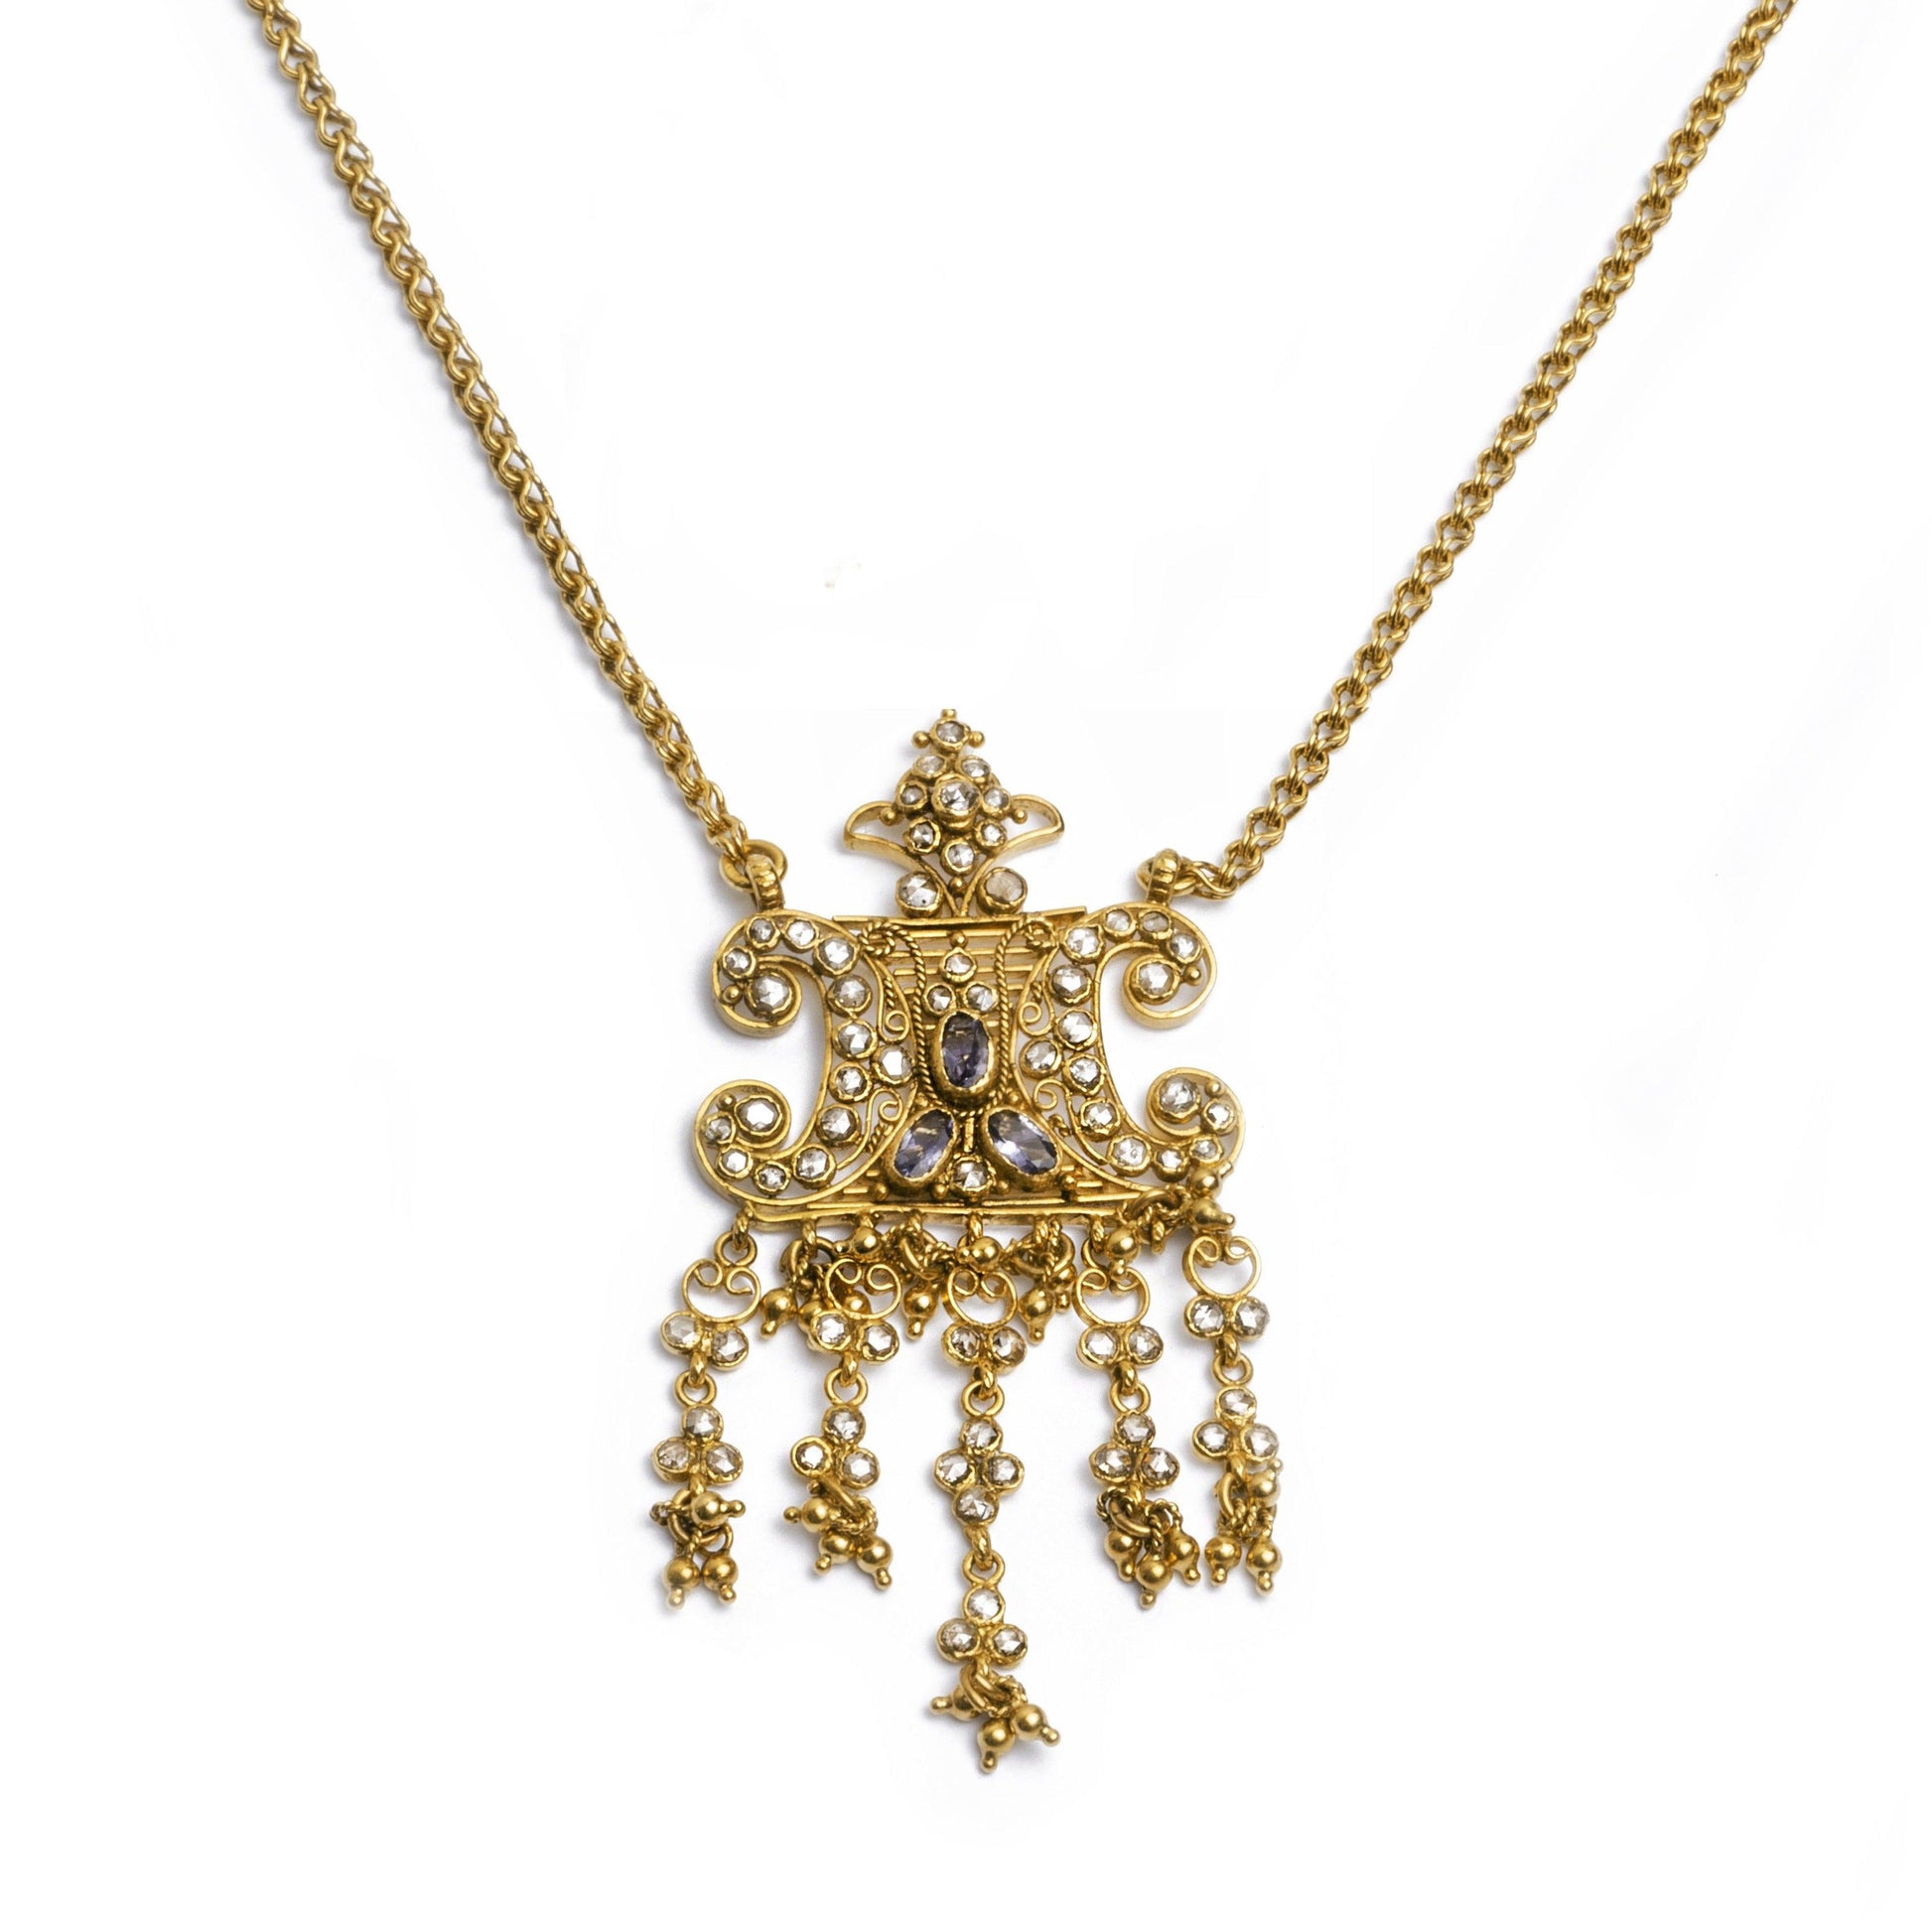 22ct Gold Champagne Diamond Necklace and Earrings set with Coloured Stones N&E-EDP2546 - Minar Jewellers